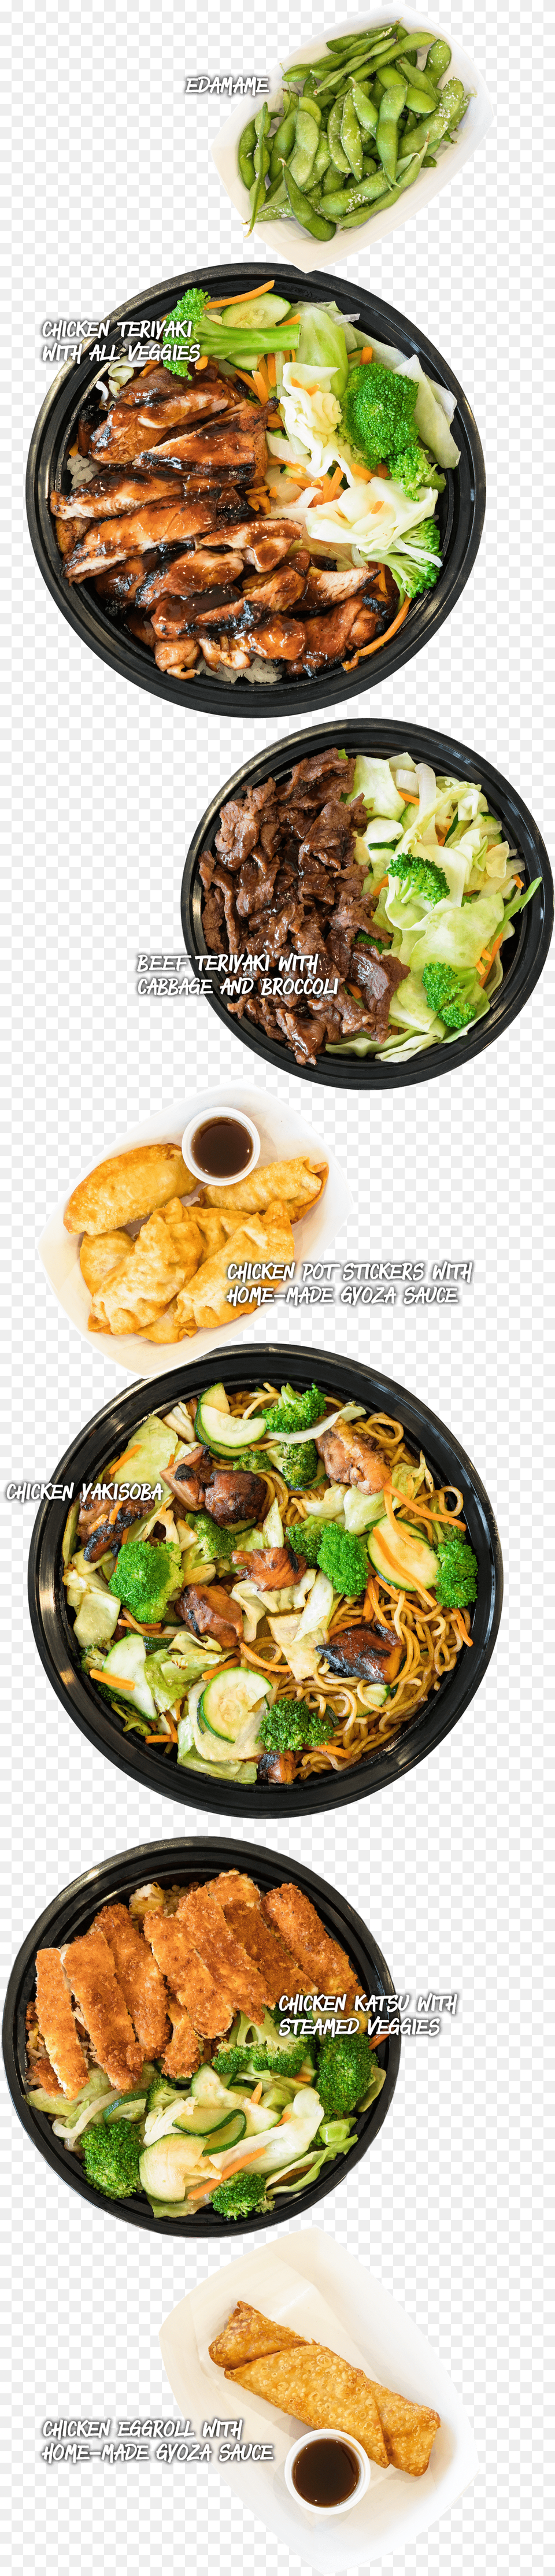 Japanese Restaurant Franchises Thukpa, Food, Lunch, Meal, Cafeteria Png